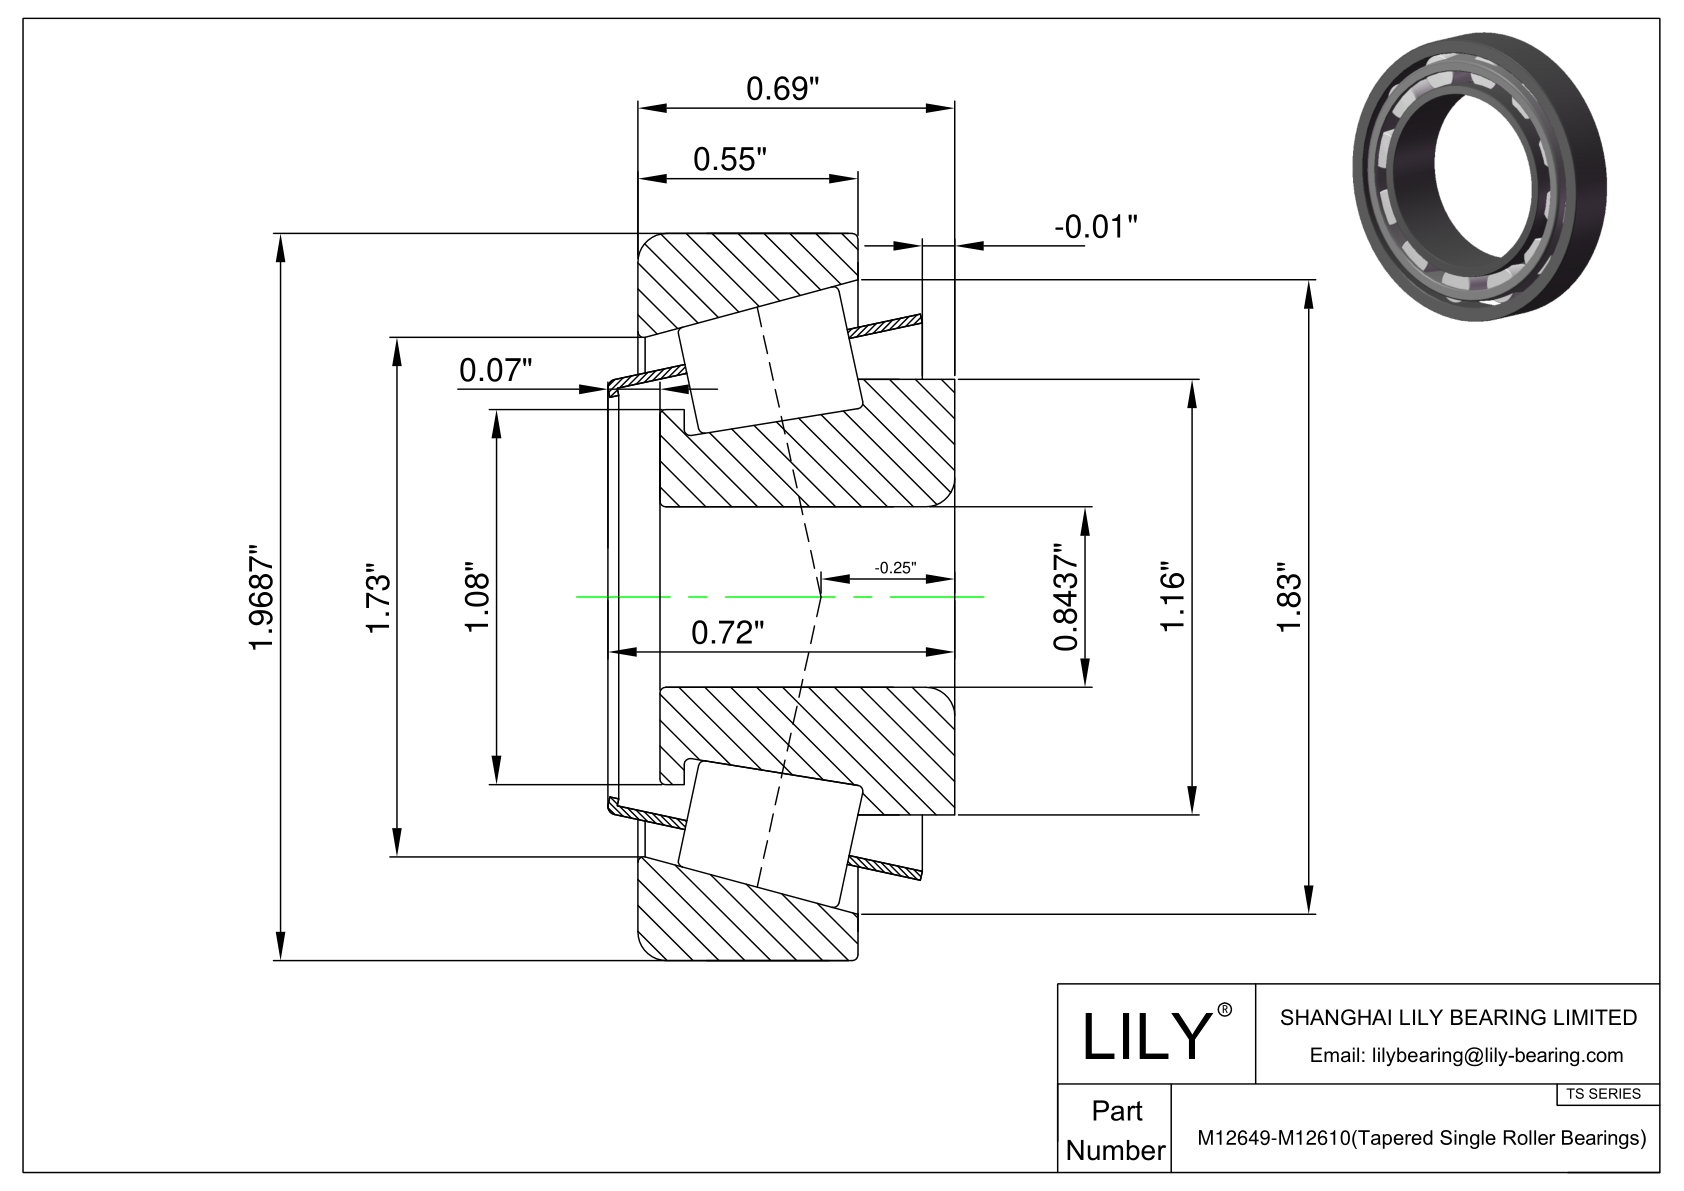 M12649-M12610 TS (Tapered Single Roller Bearings) (Imperial) cad drawing